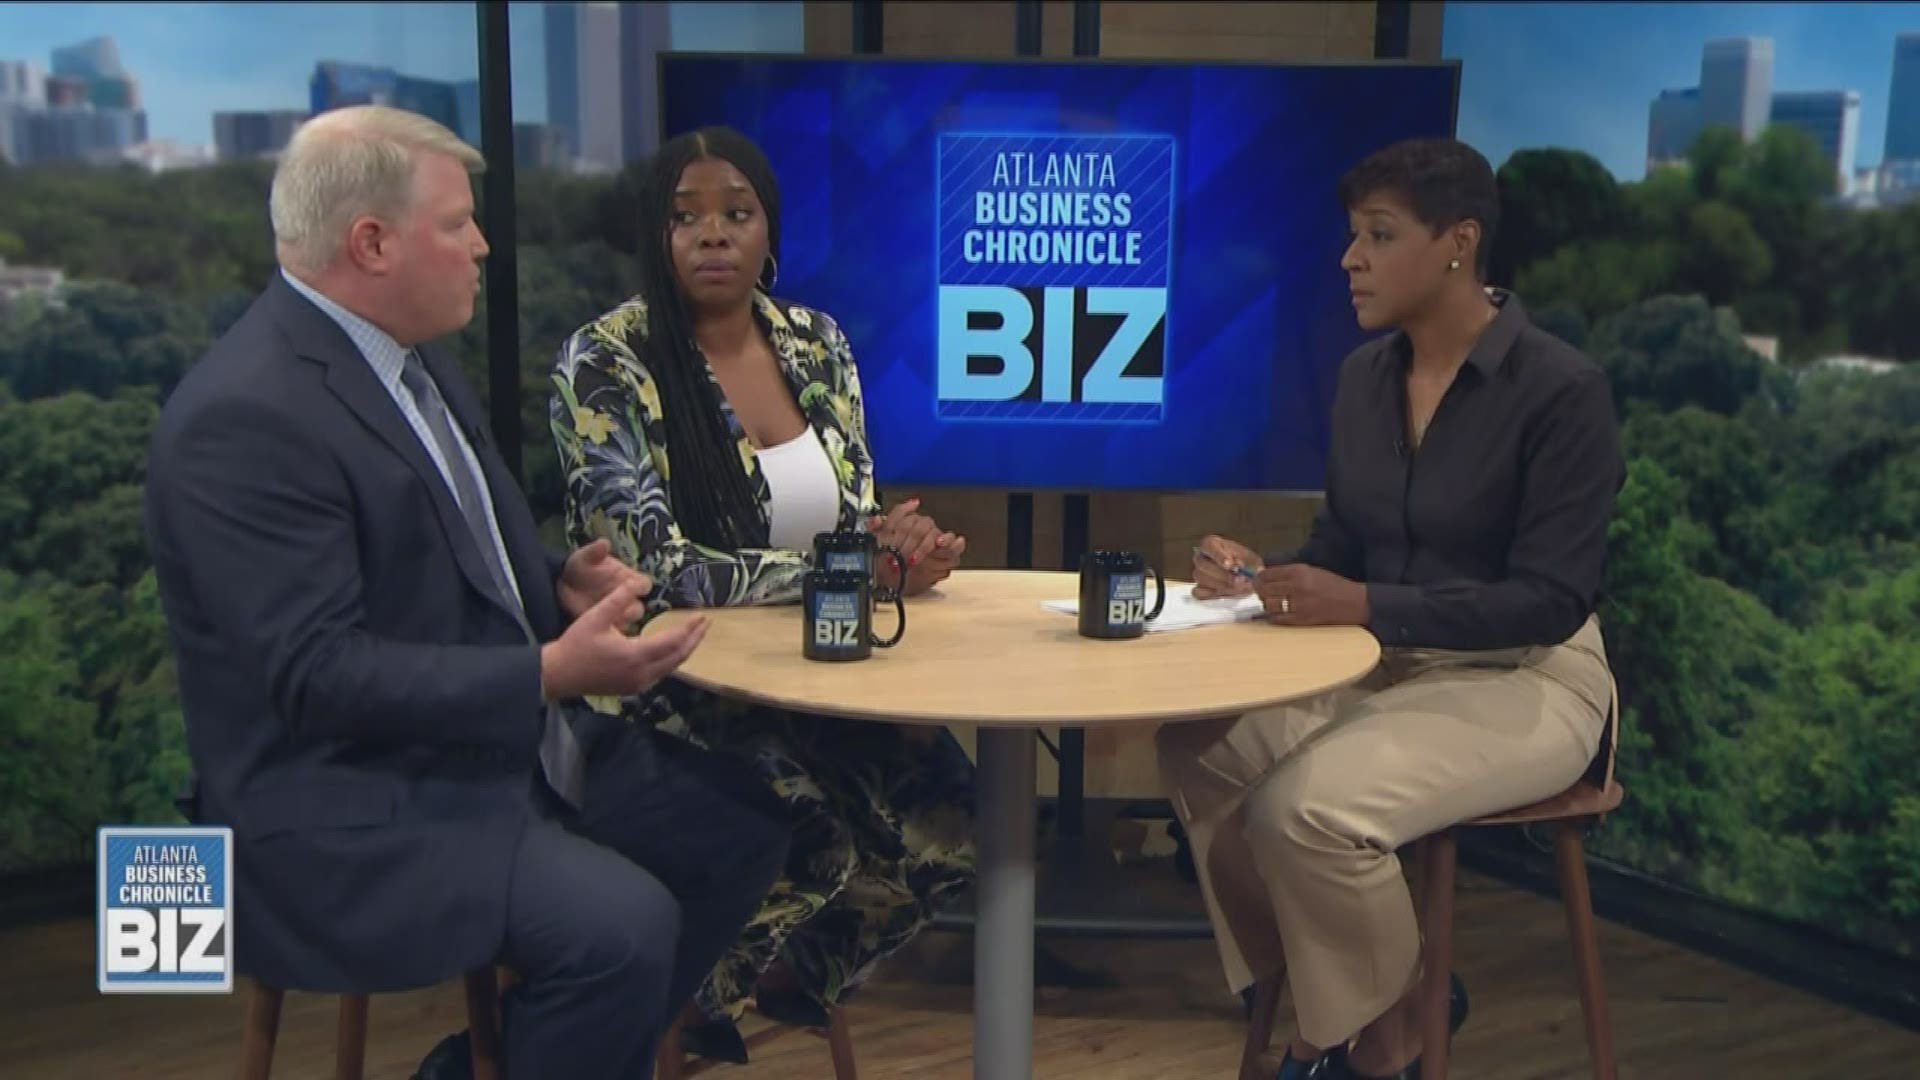 Atlanta-based companies attracted more than $200 million in venture capital during the recent quarter! Where's it going? Crystal Edmonson sits down with PwC's John Nee and Goodr CEO Jasmine Crowe on 'Atlanta Business Chronicle's BIZ'